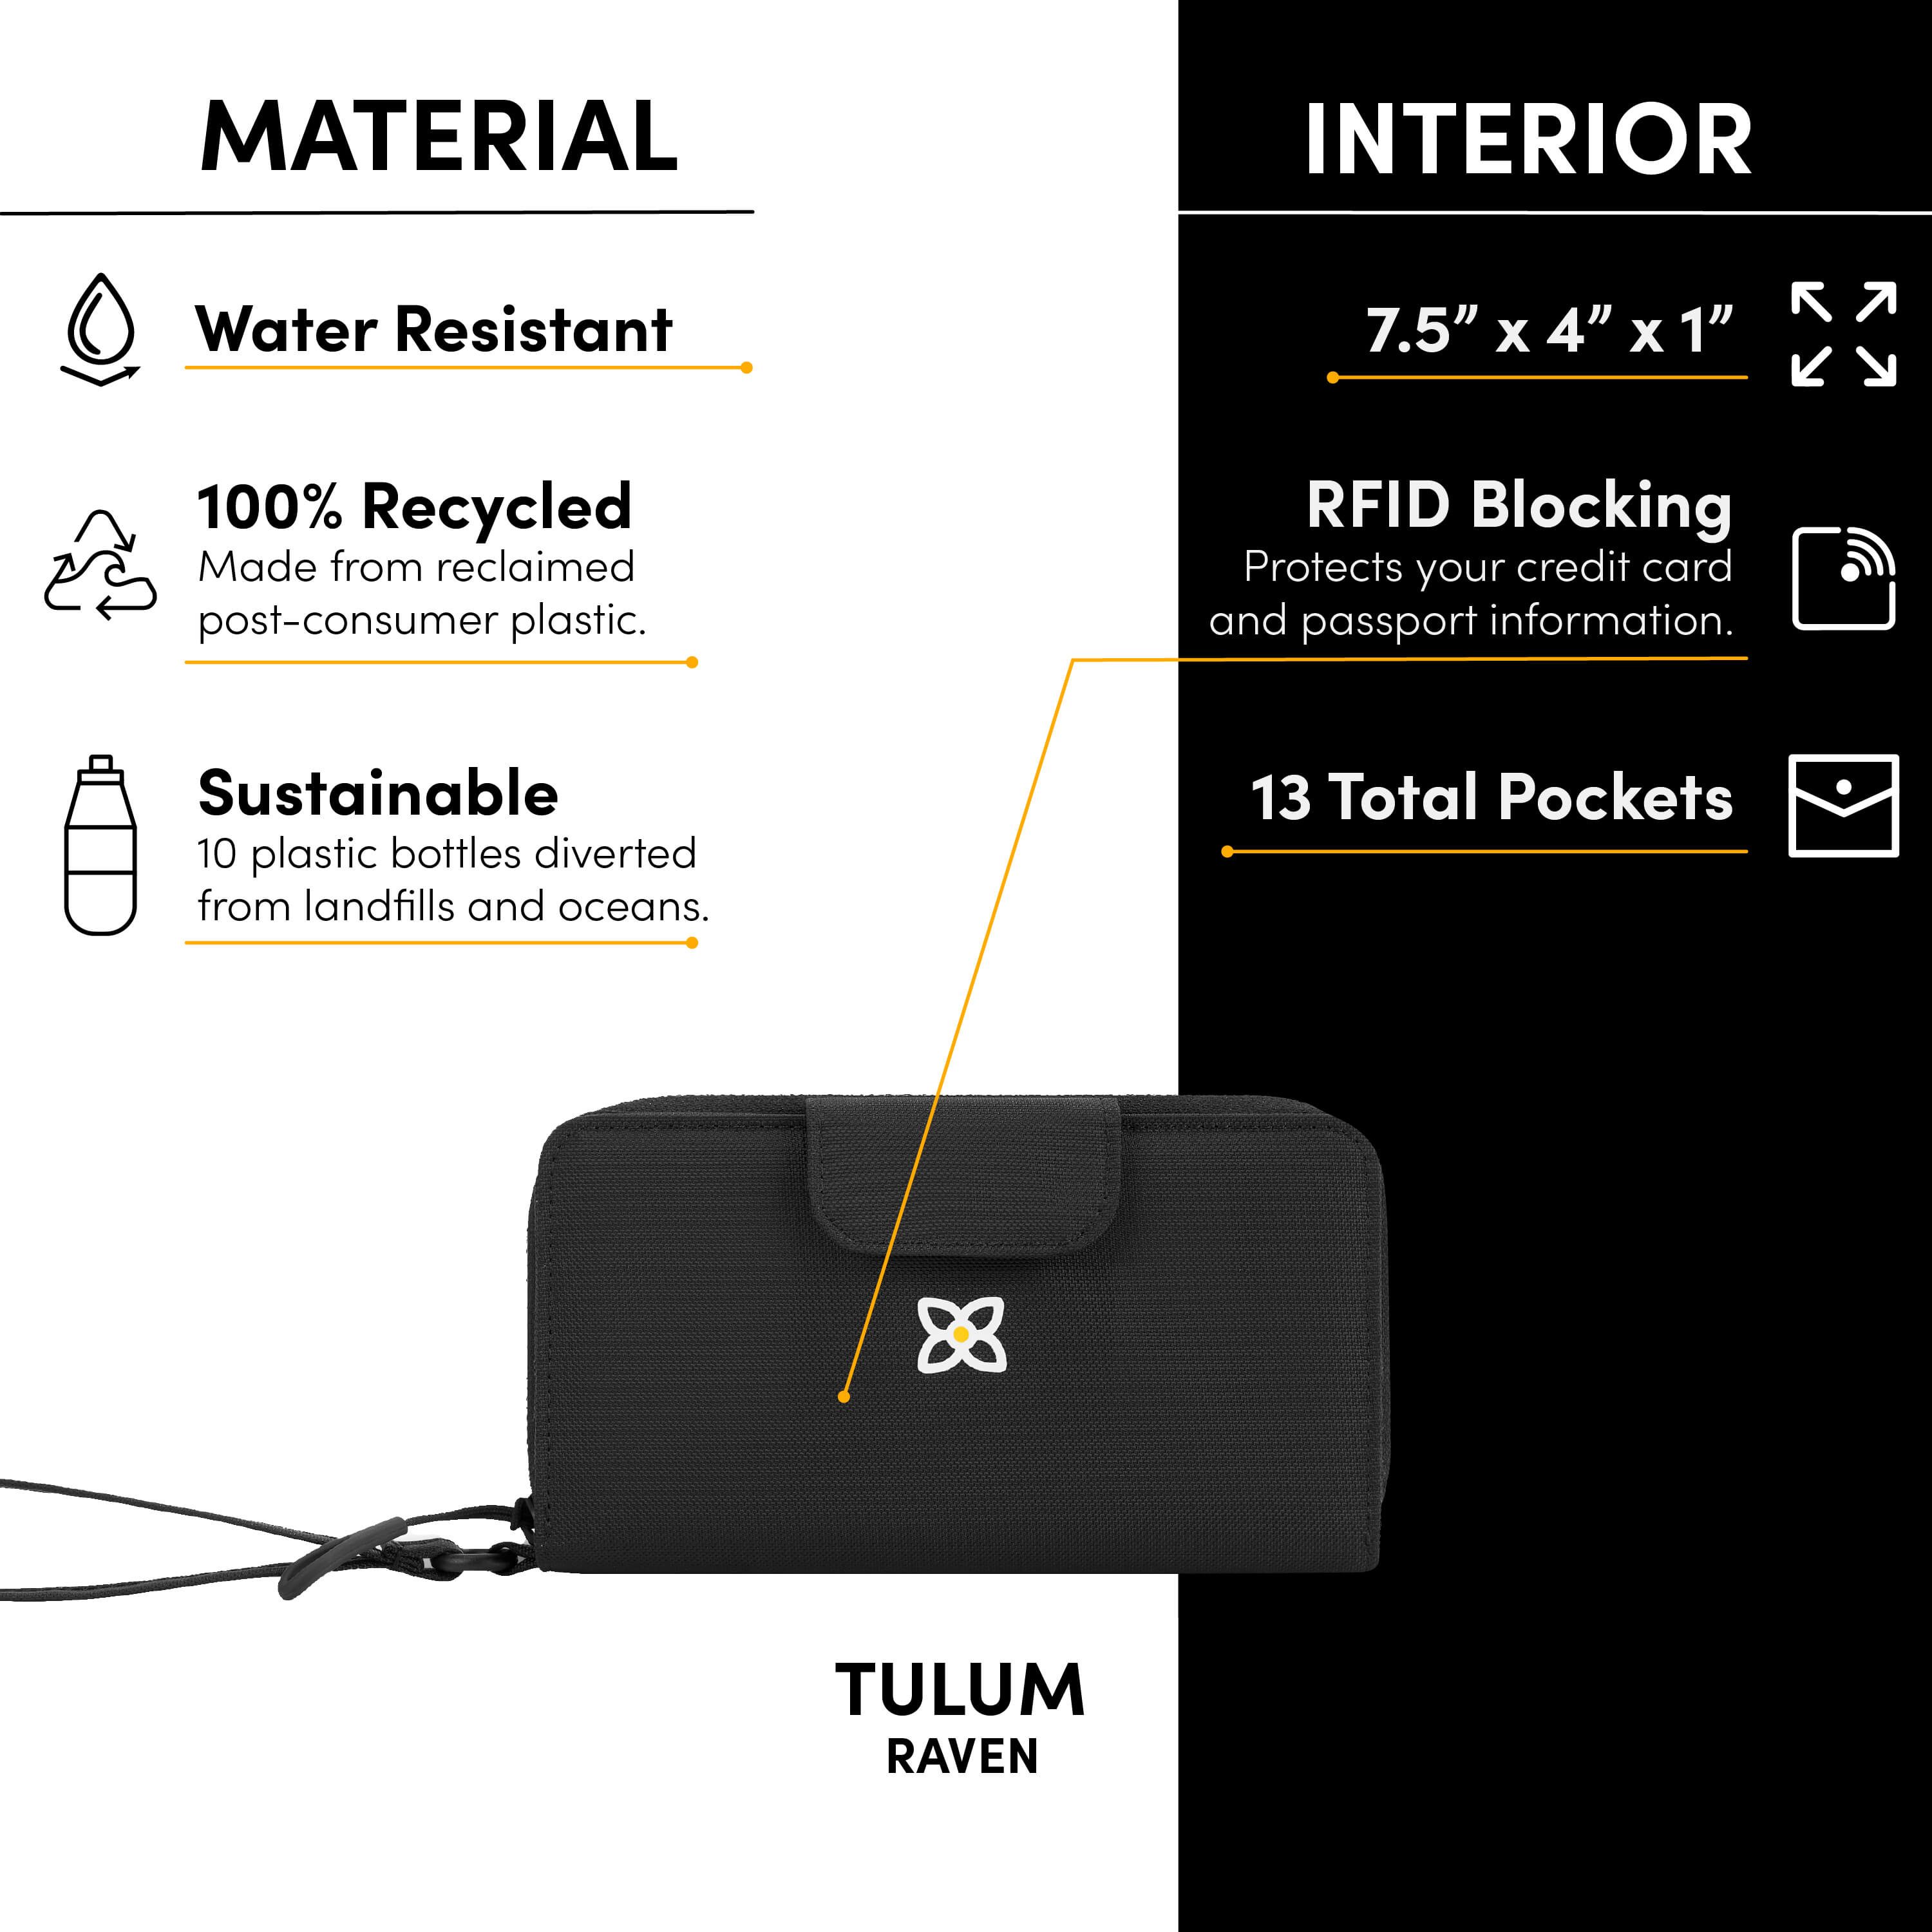 Graphic showing the special features of Sherpani RFID travel wallet, the Tulum: water-resistant wallet, sustainably made from recycled materials, RFID blocking, 13 total pockets for organization. 